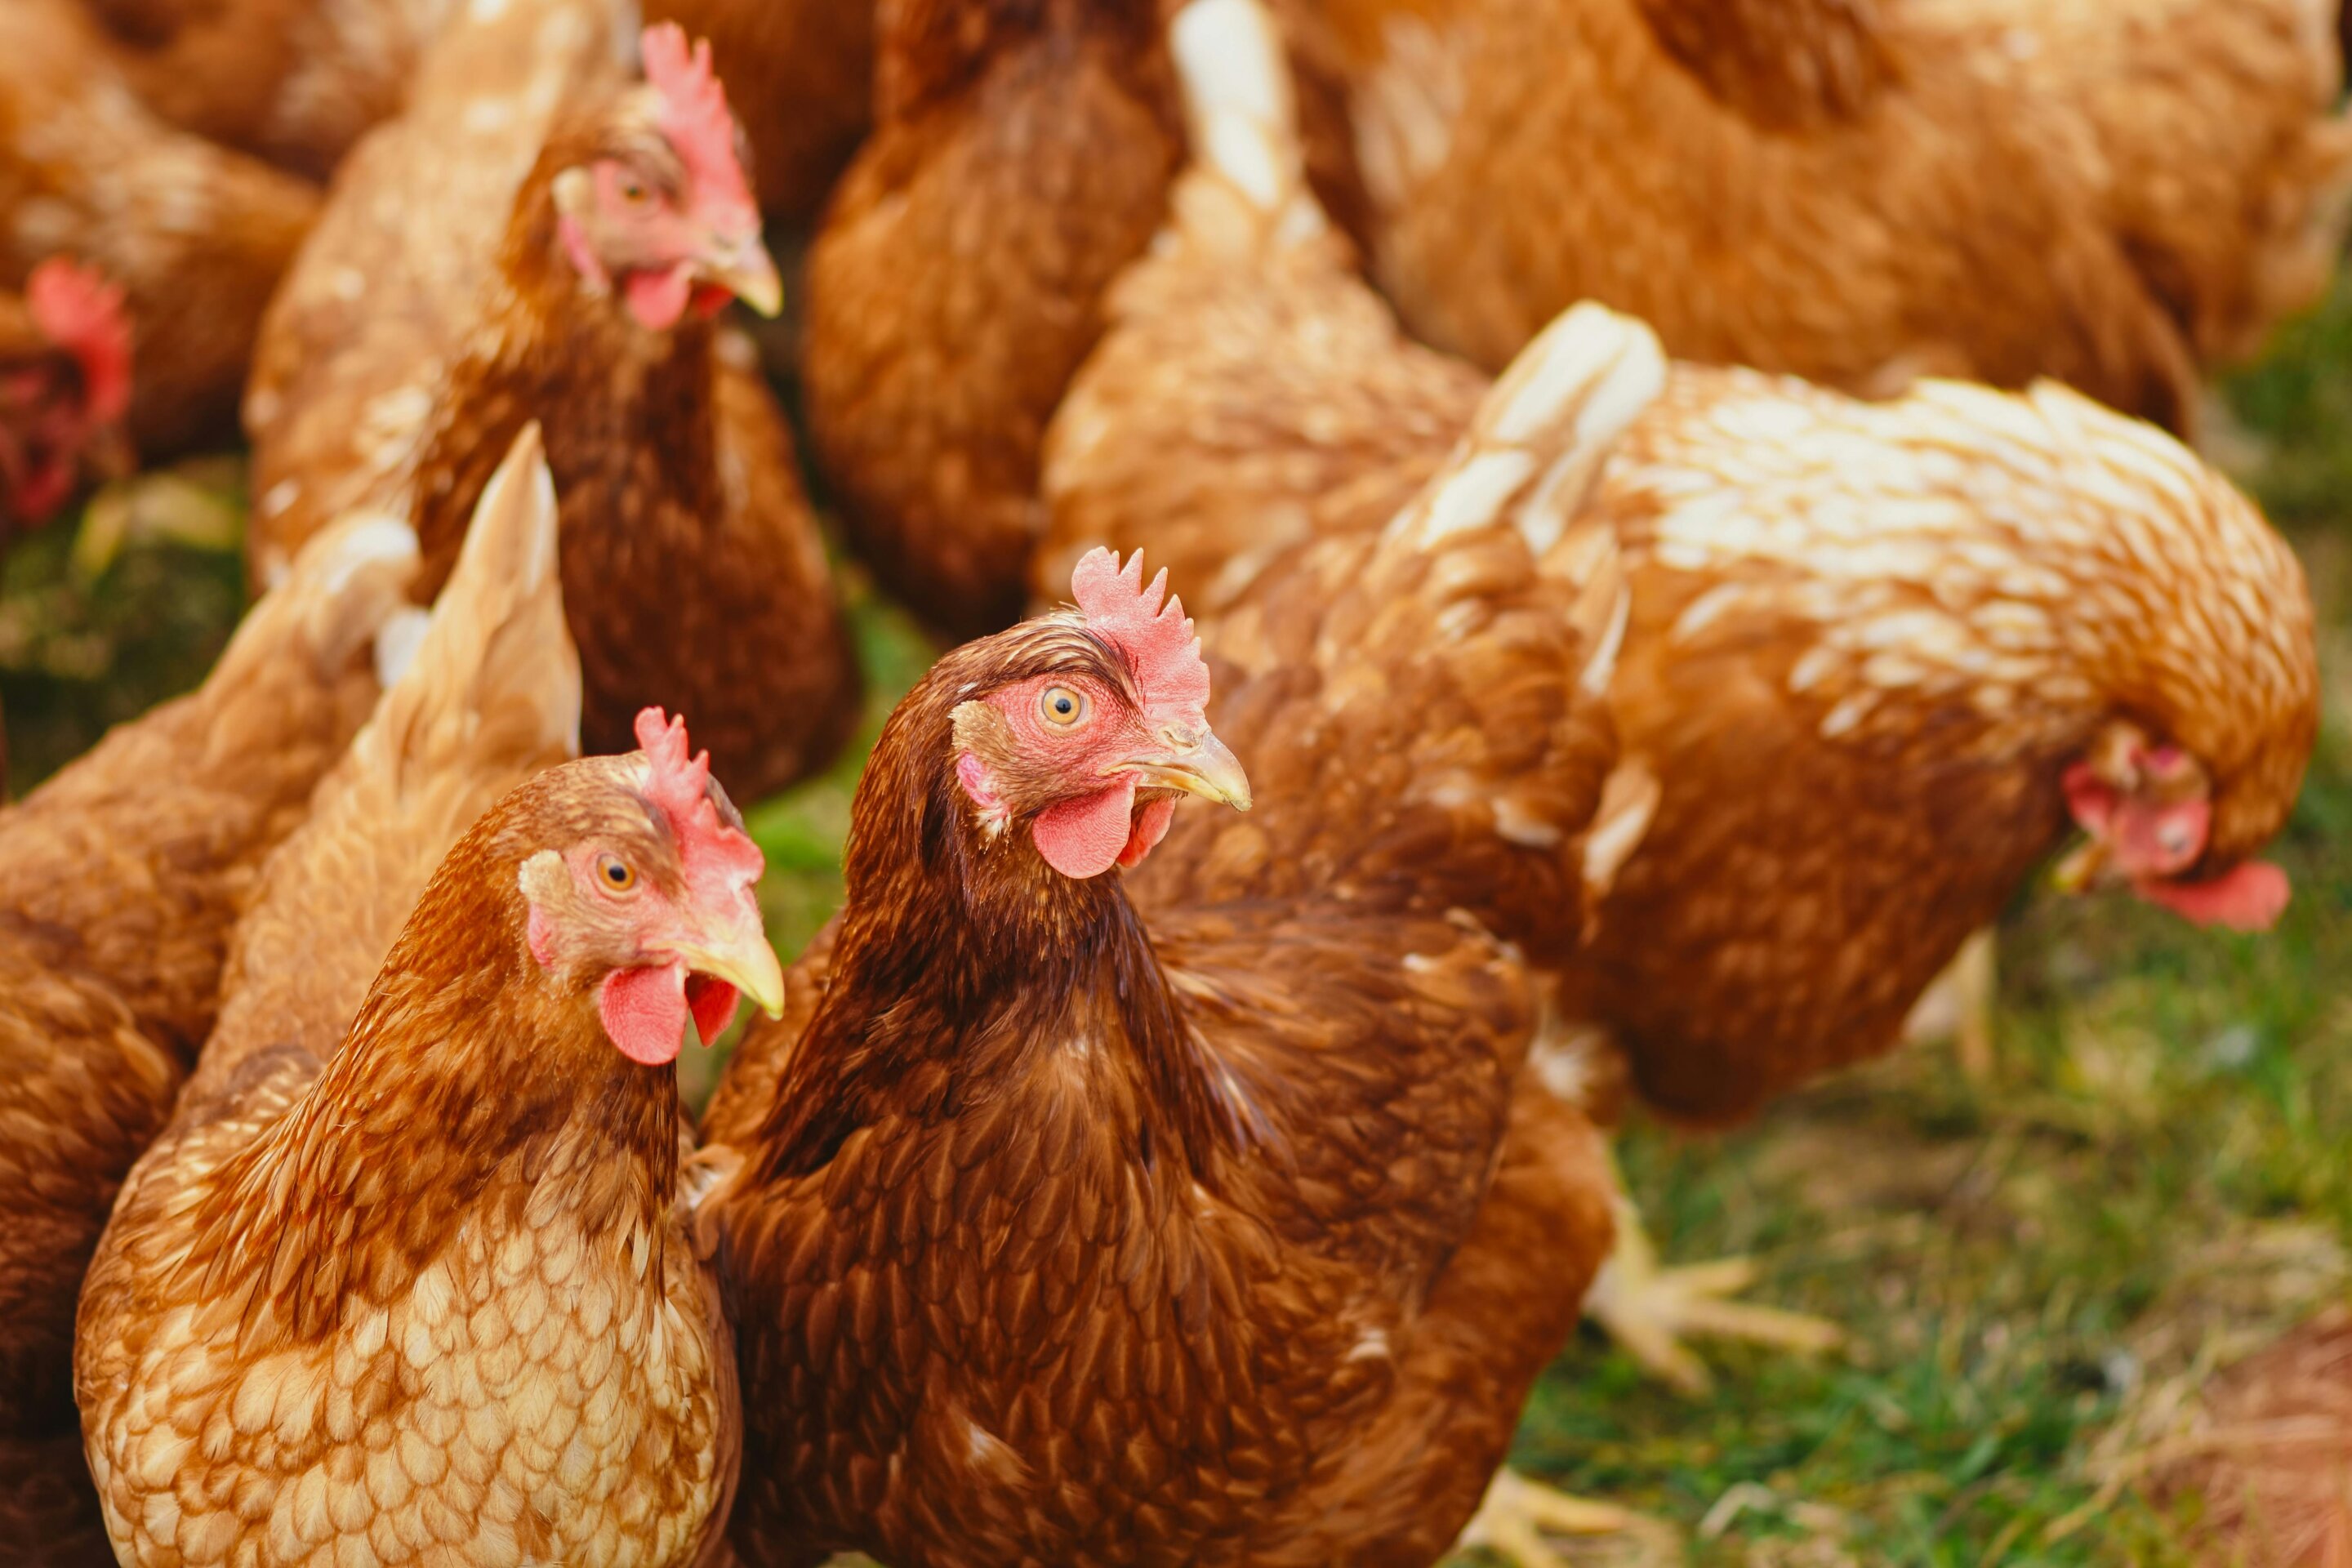 #Bird flu is hitting Australian poultry farms—the first human case has been reported in Victoria